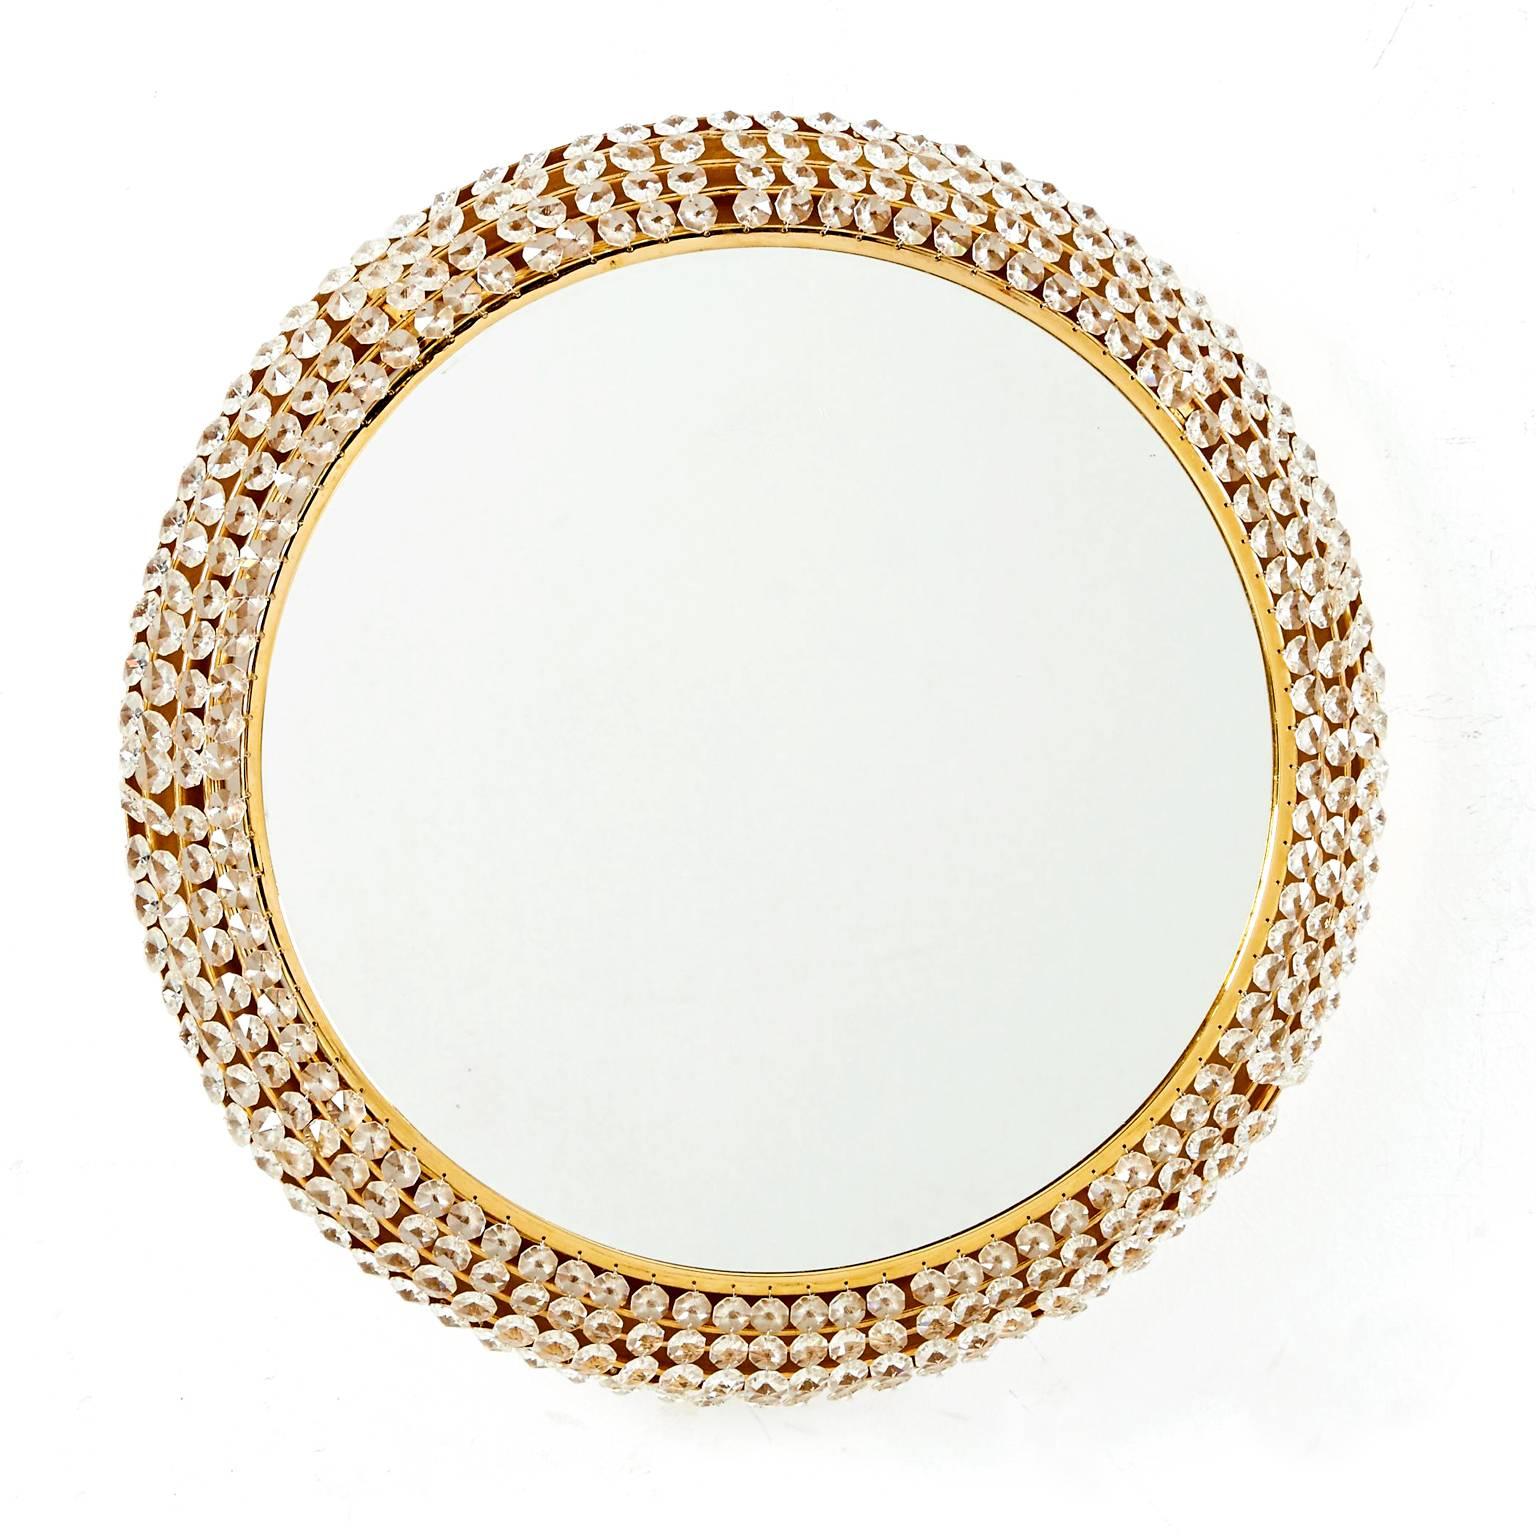 A brilliant Midcentury Modern gilded brass round mirror with dozens of rows of crystals suspended over an electrified backplate holding six candelabra base sockets. Newly rewired, the mirror has an external lead with plug but may easily be mounted